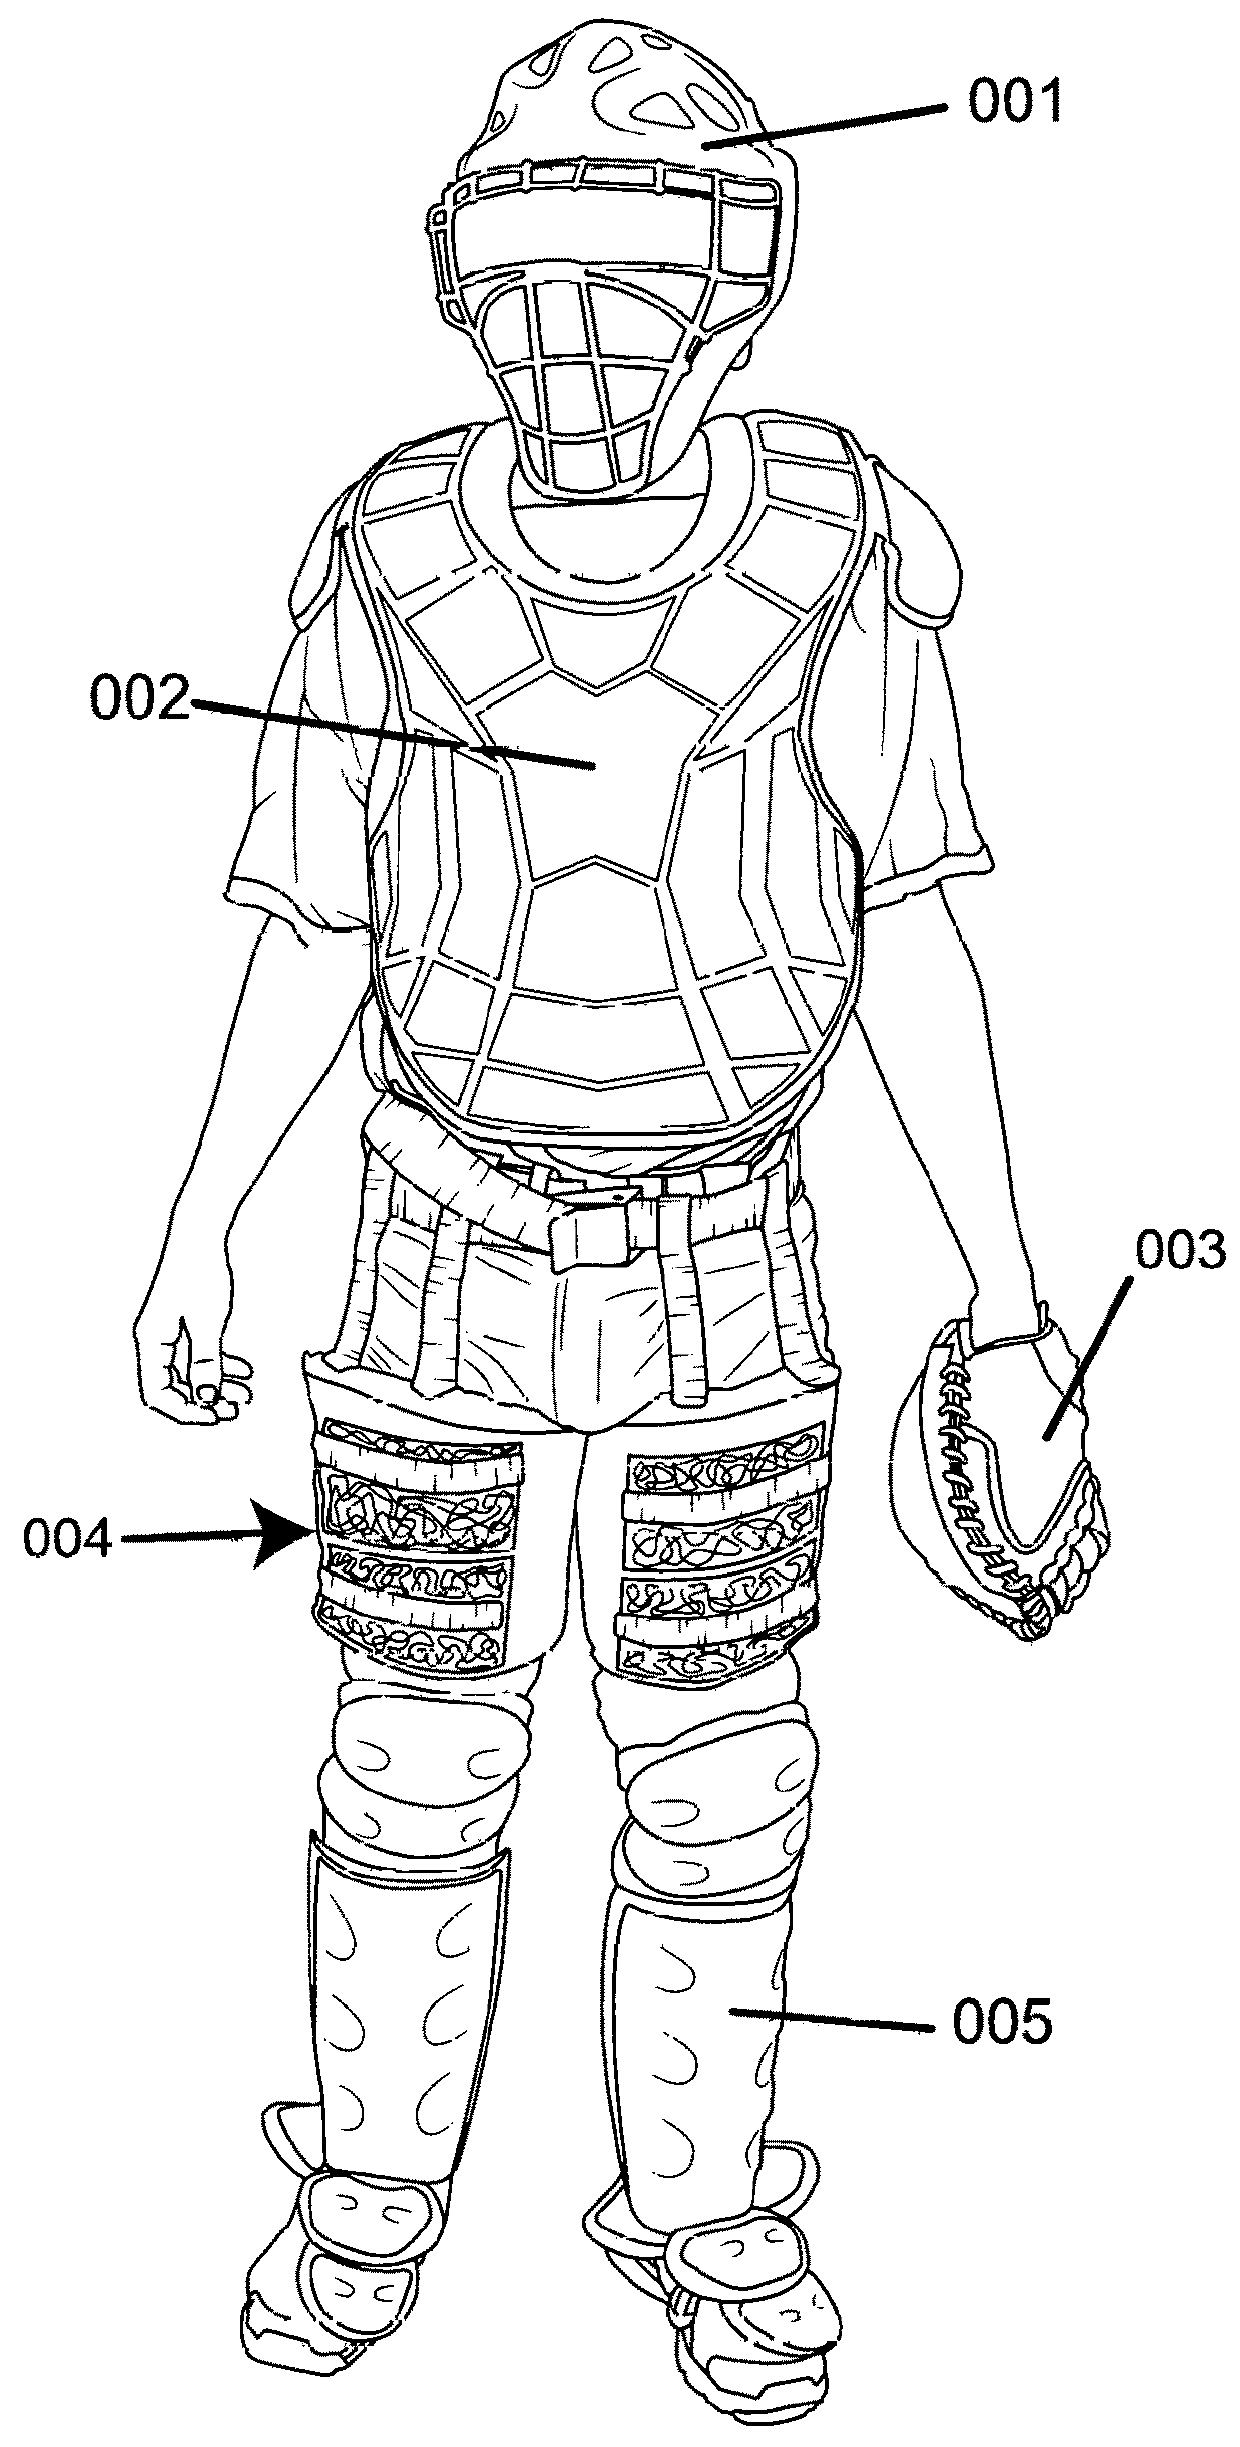 Removable inner thigh and frontal thigh protector for baseball and softball catchers and umpires